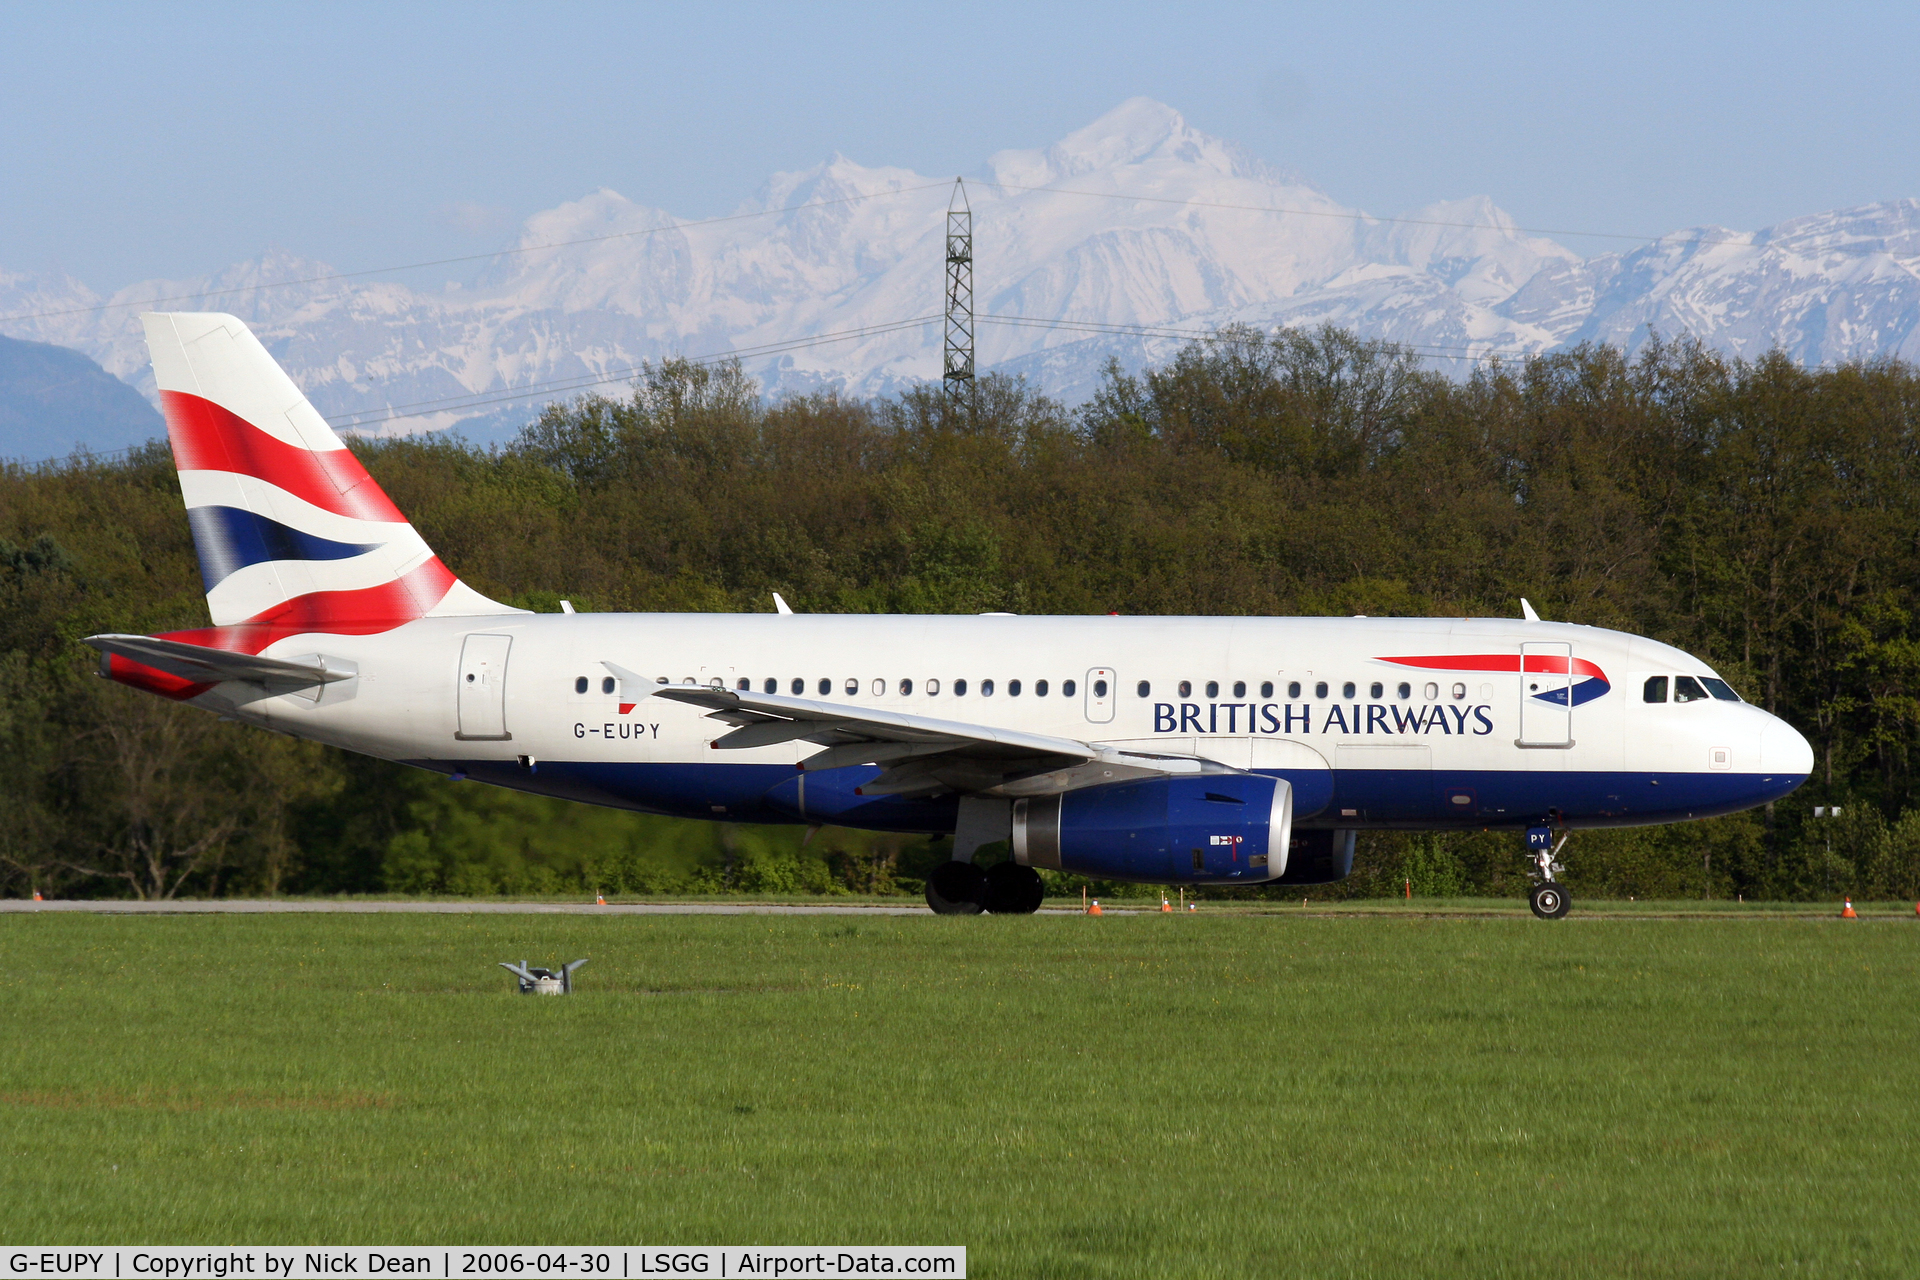 G-EUPY, 2001 Airbus A319-131 C/N 1466, Mont Blanc rising in the bckground